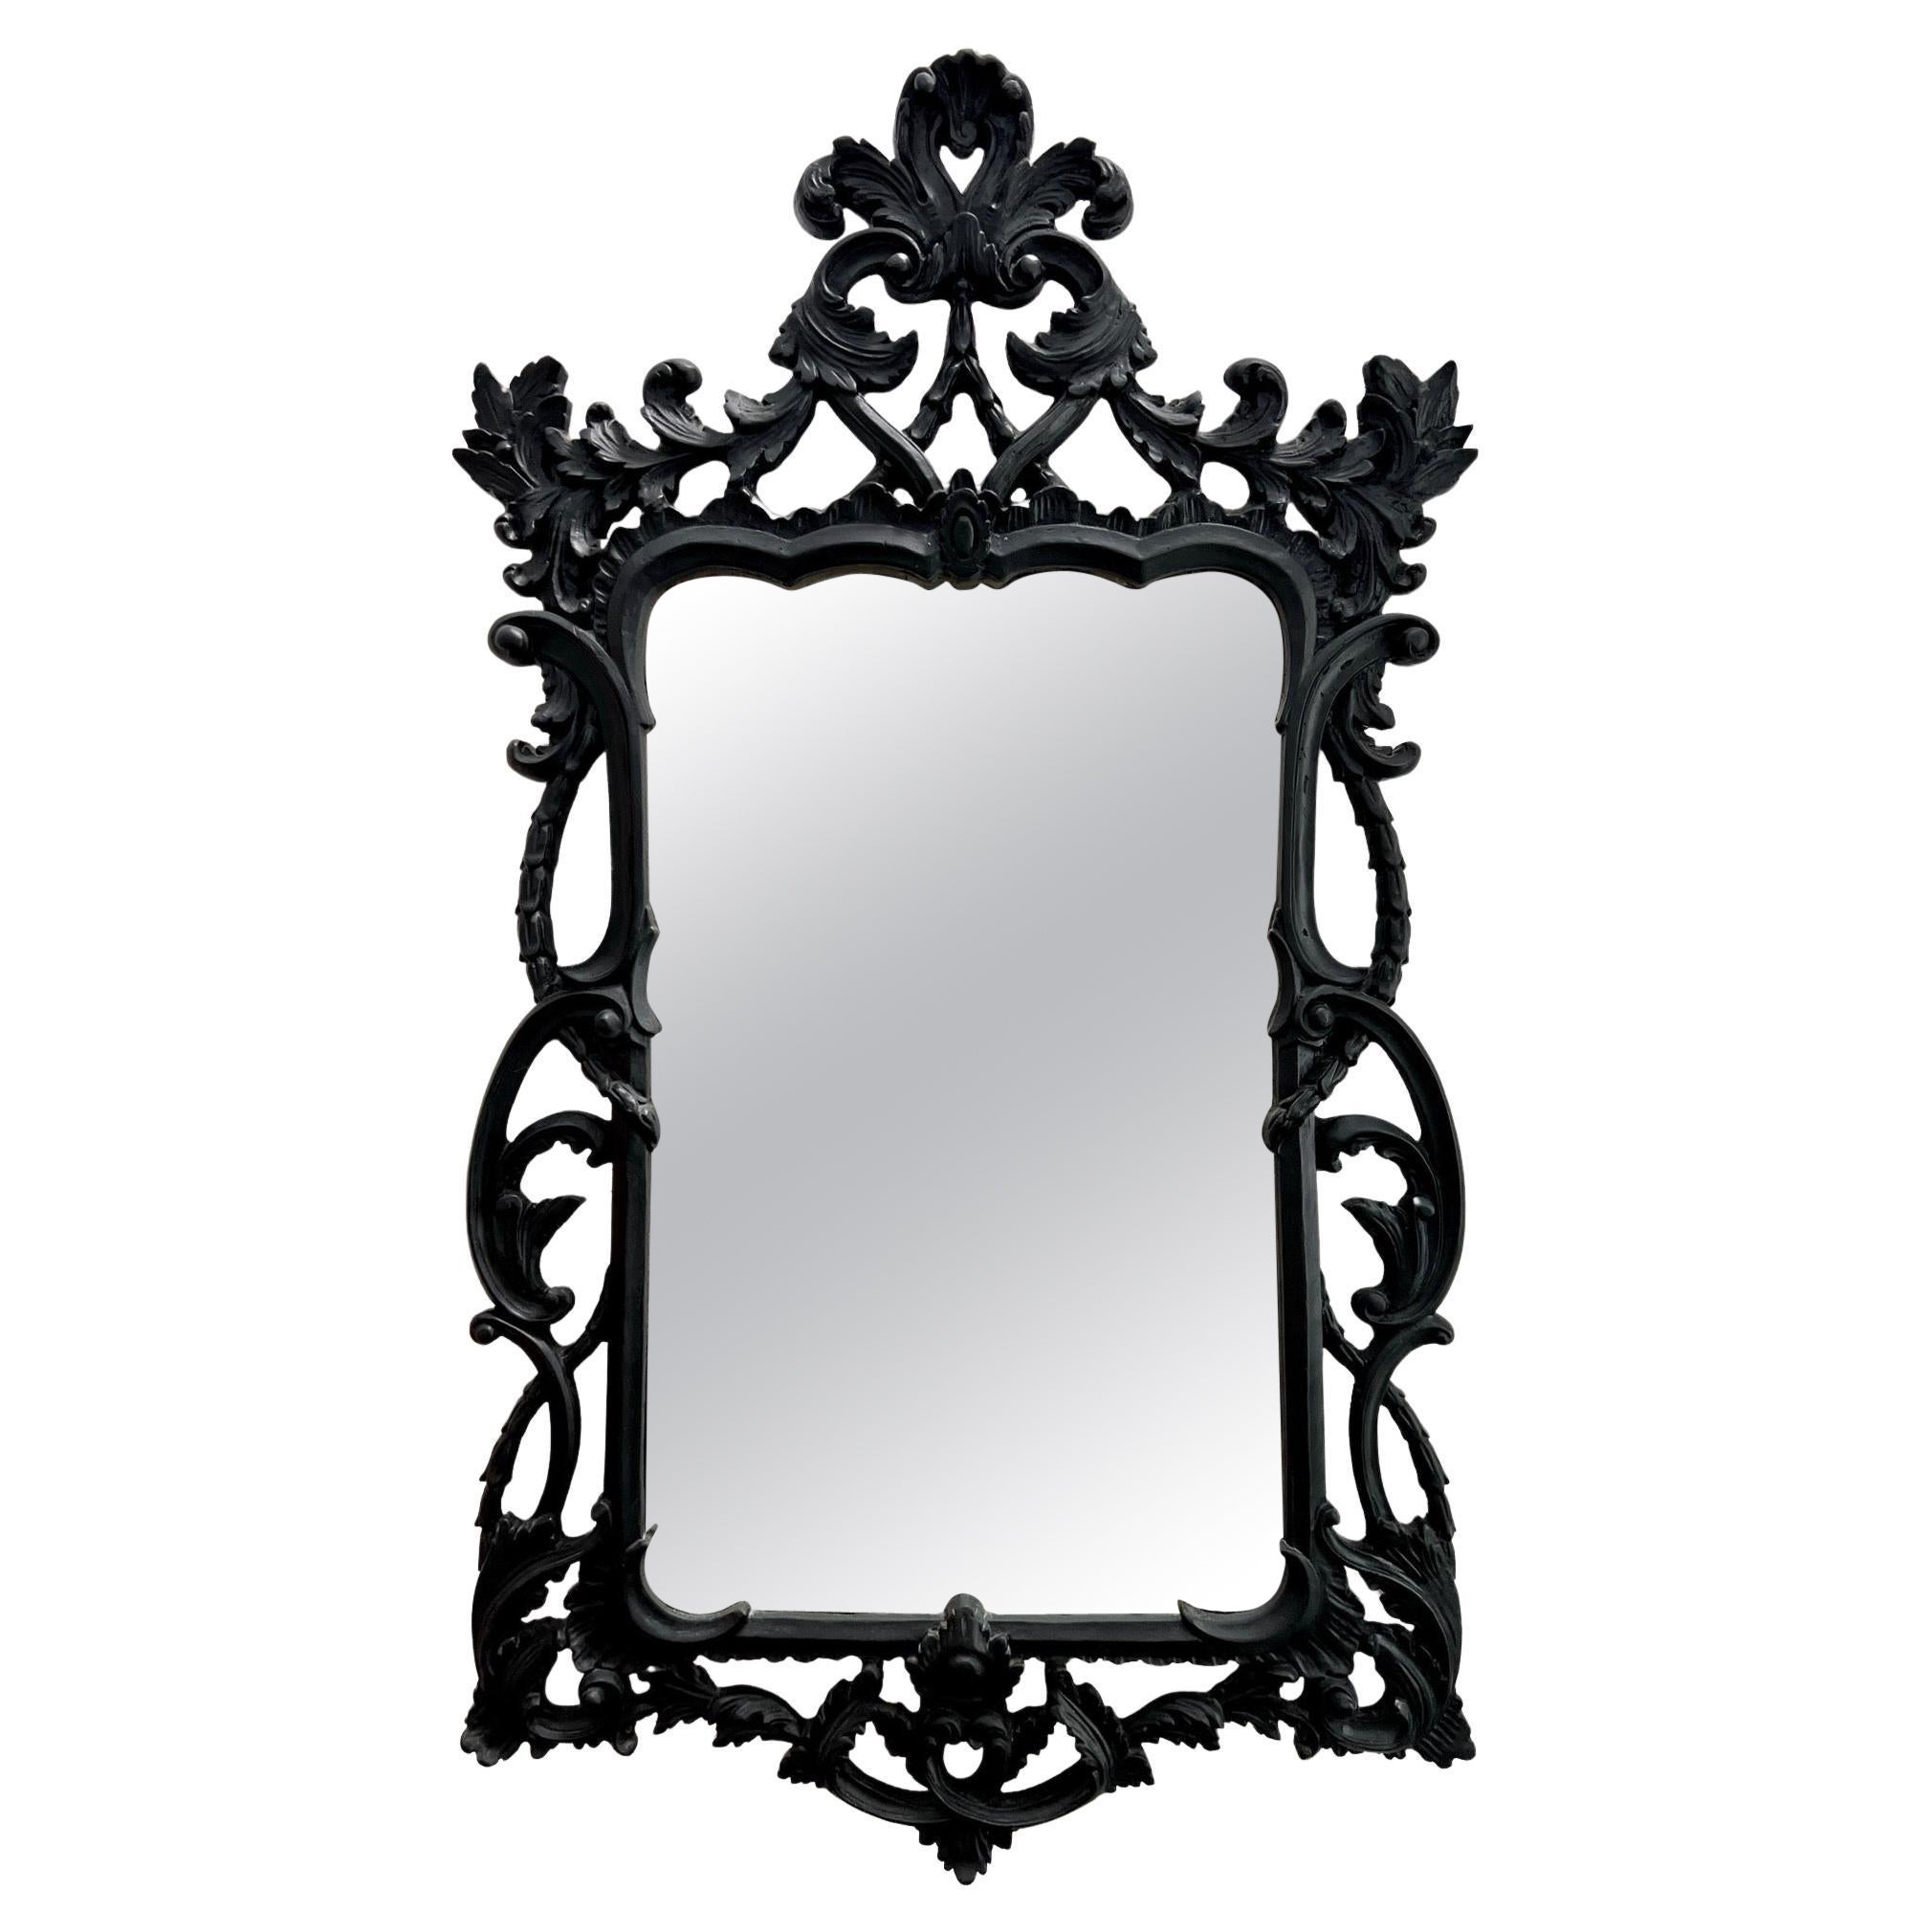 Hollywood Regency Black Carved Wood Mirror with Rococo Frame, Italy C. 1970's